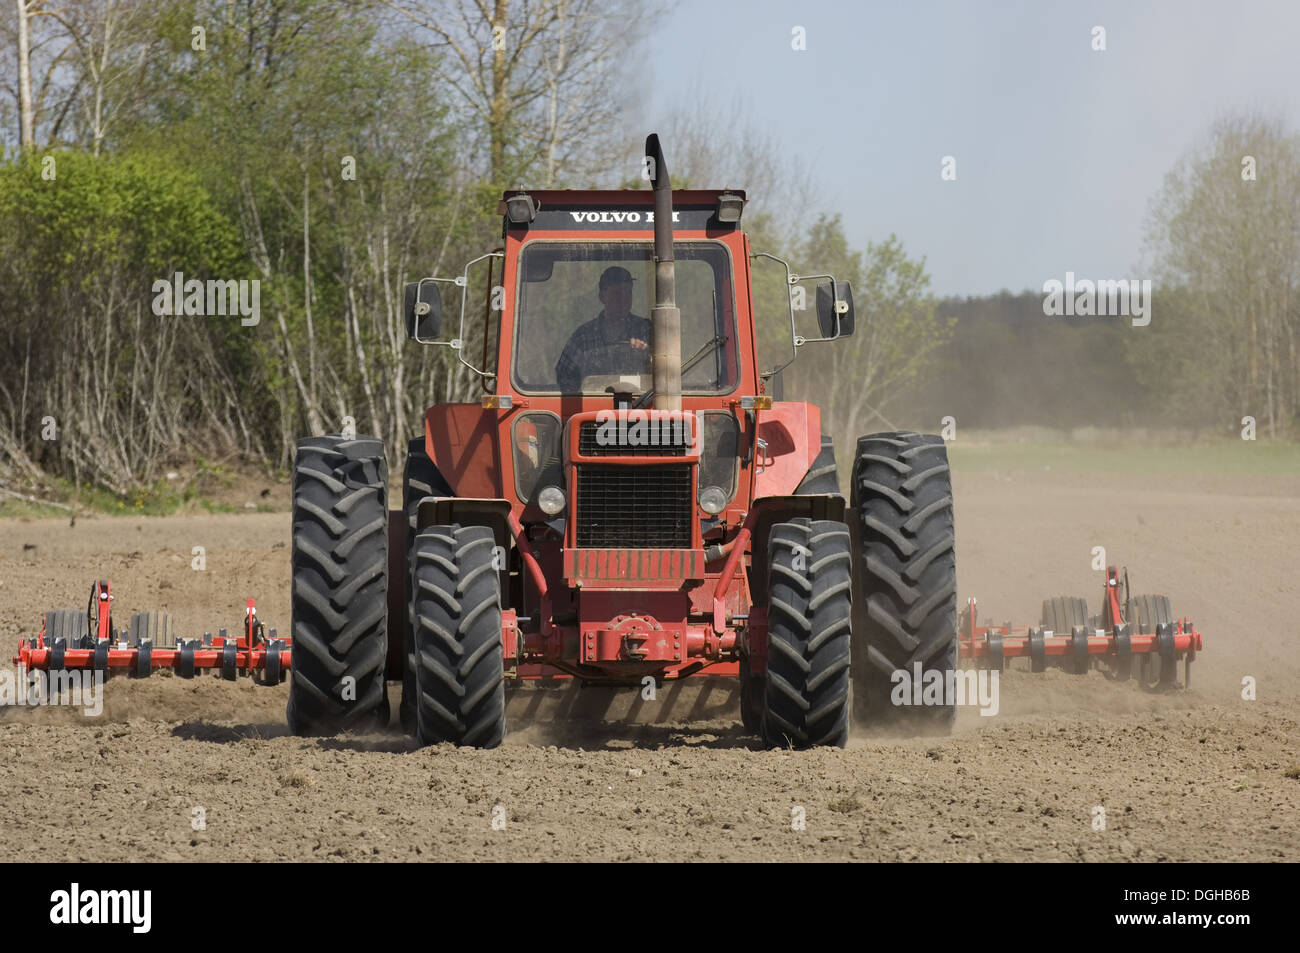 Volvo tractor pulling harrows, cultivating arable field, Sweden Stock Photo